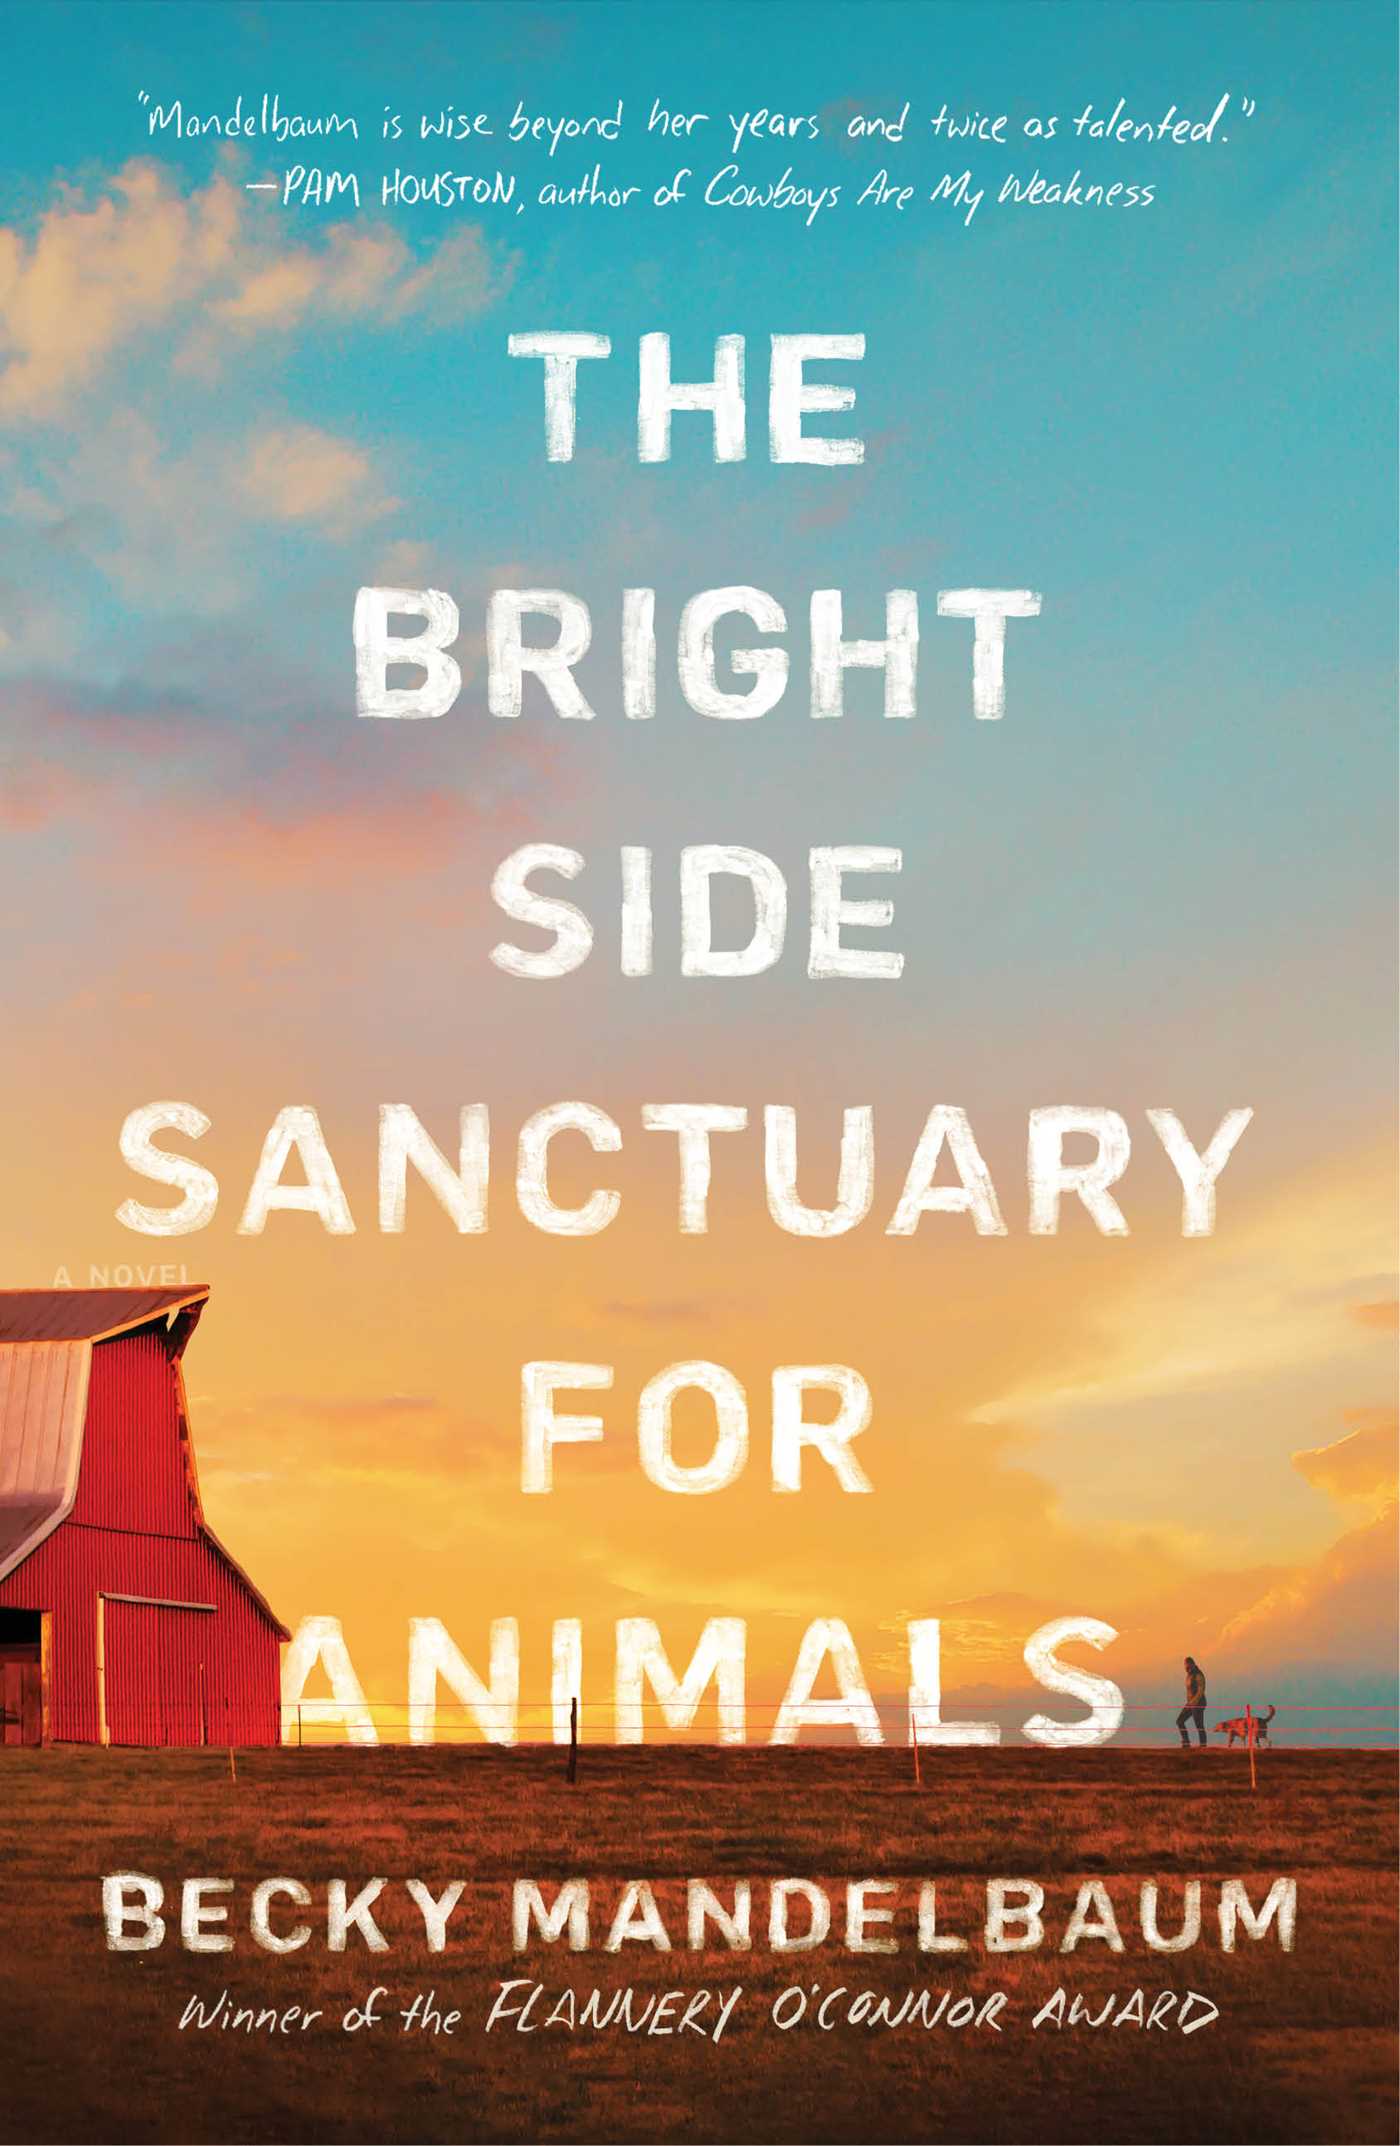 [EPUB] The Bright Side Sanctuary for Animals by Becky Mandelbaum